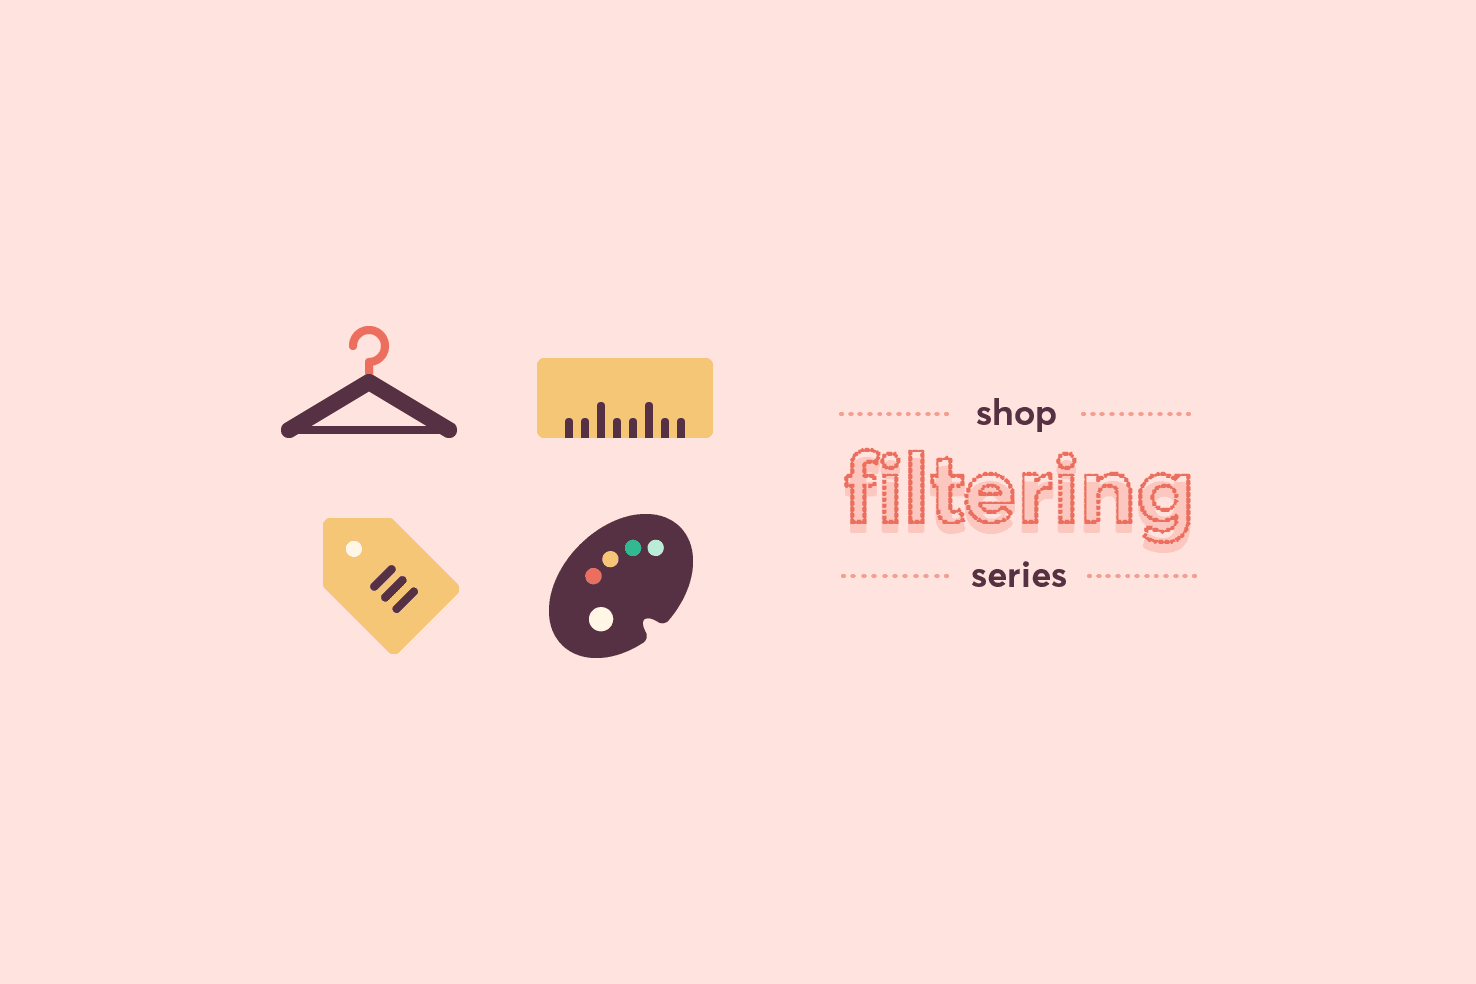 Shop filter series: visual style (featured image)